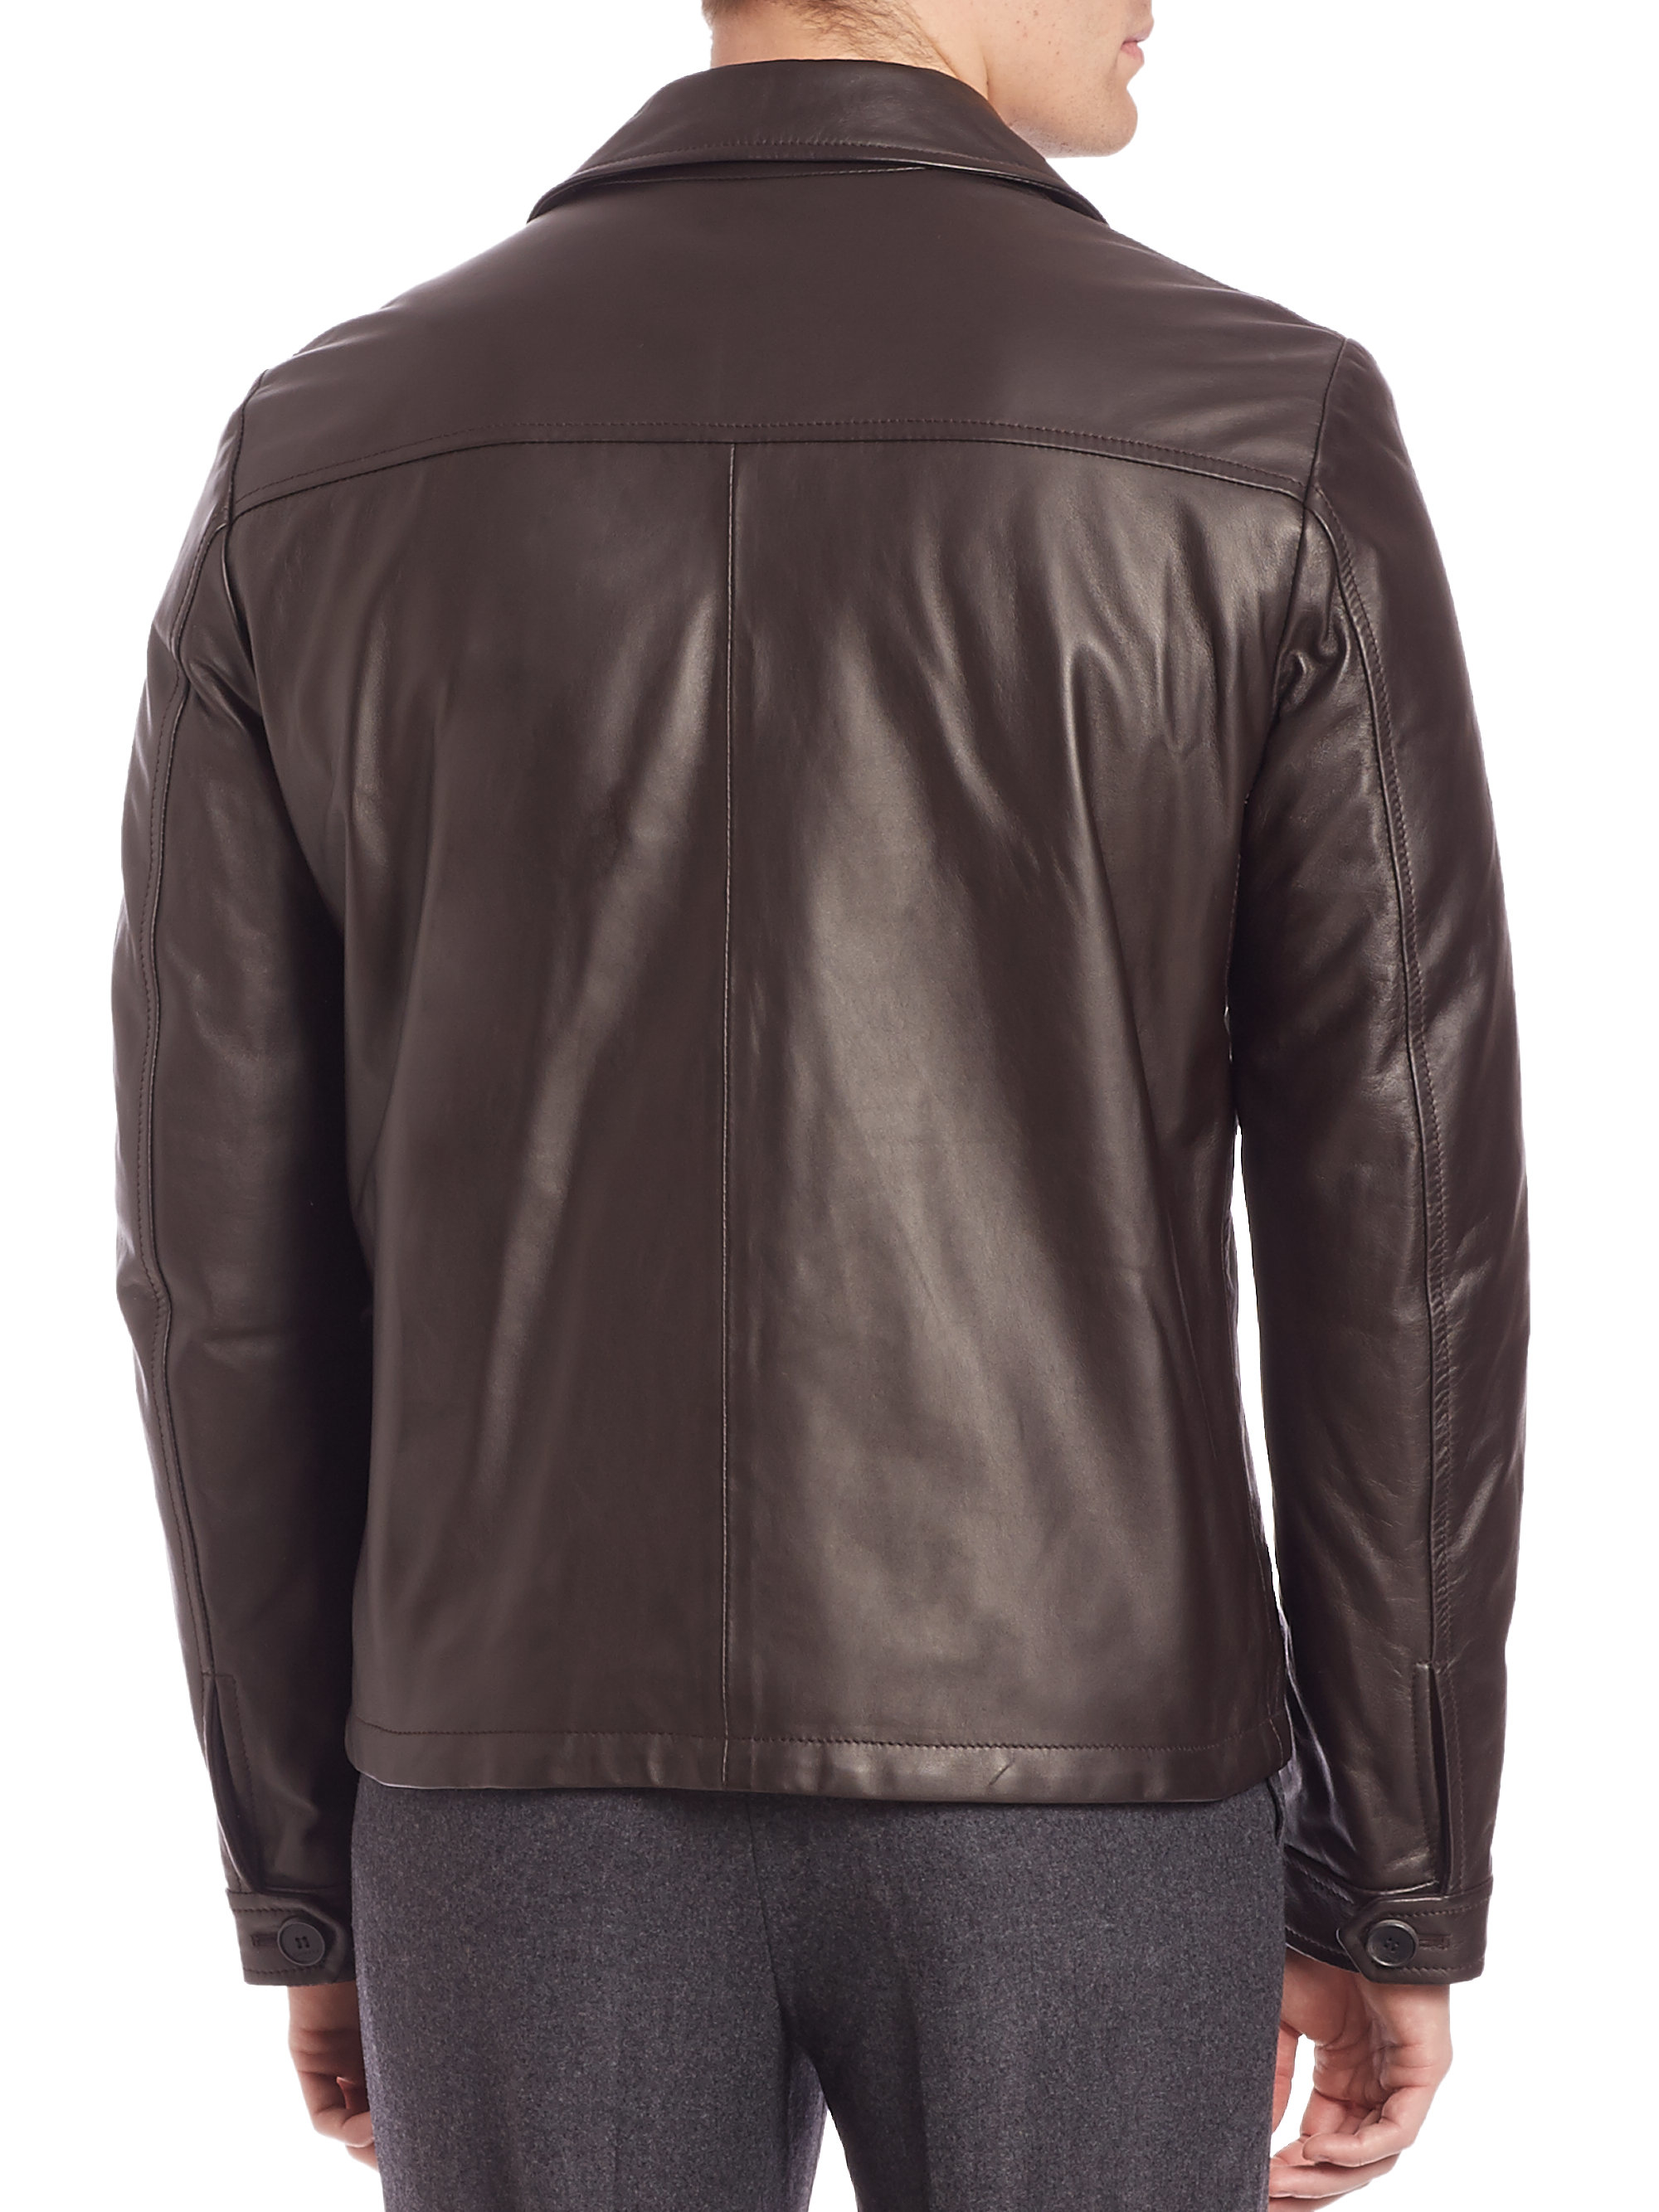 Canali Reversible Leather Jacket in Brown for Men | Lyst